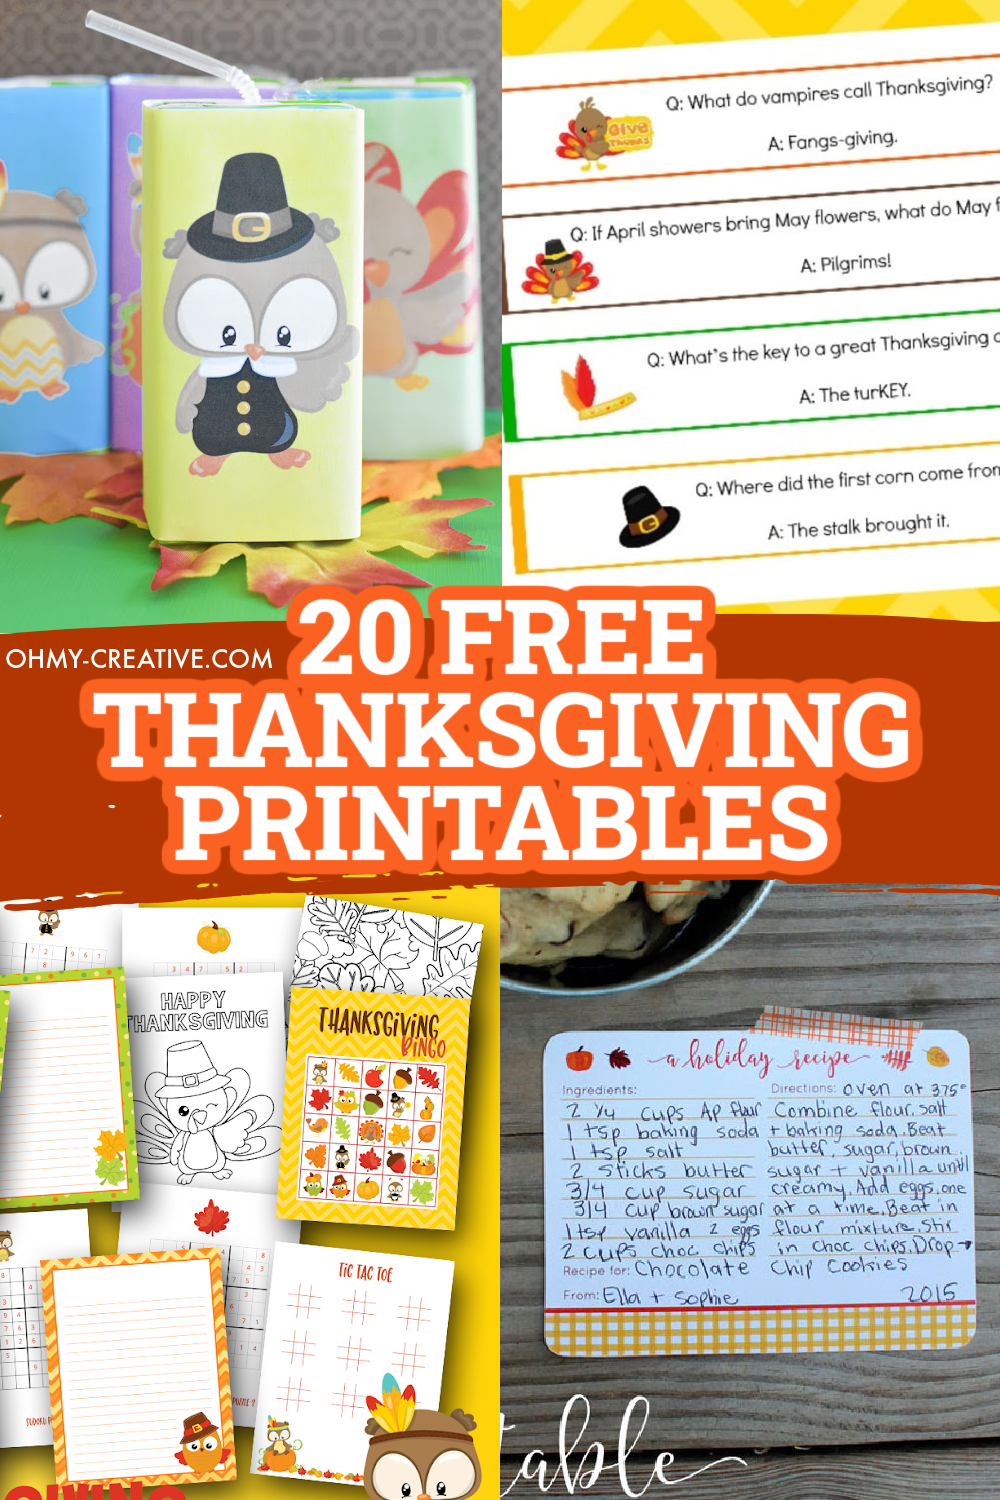 A collage Thanksgiving printables free